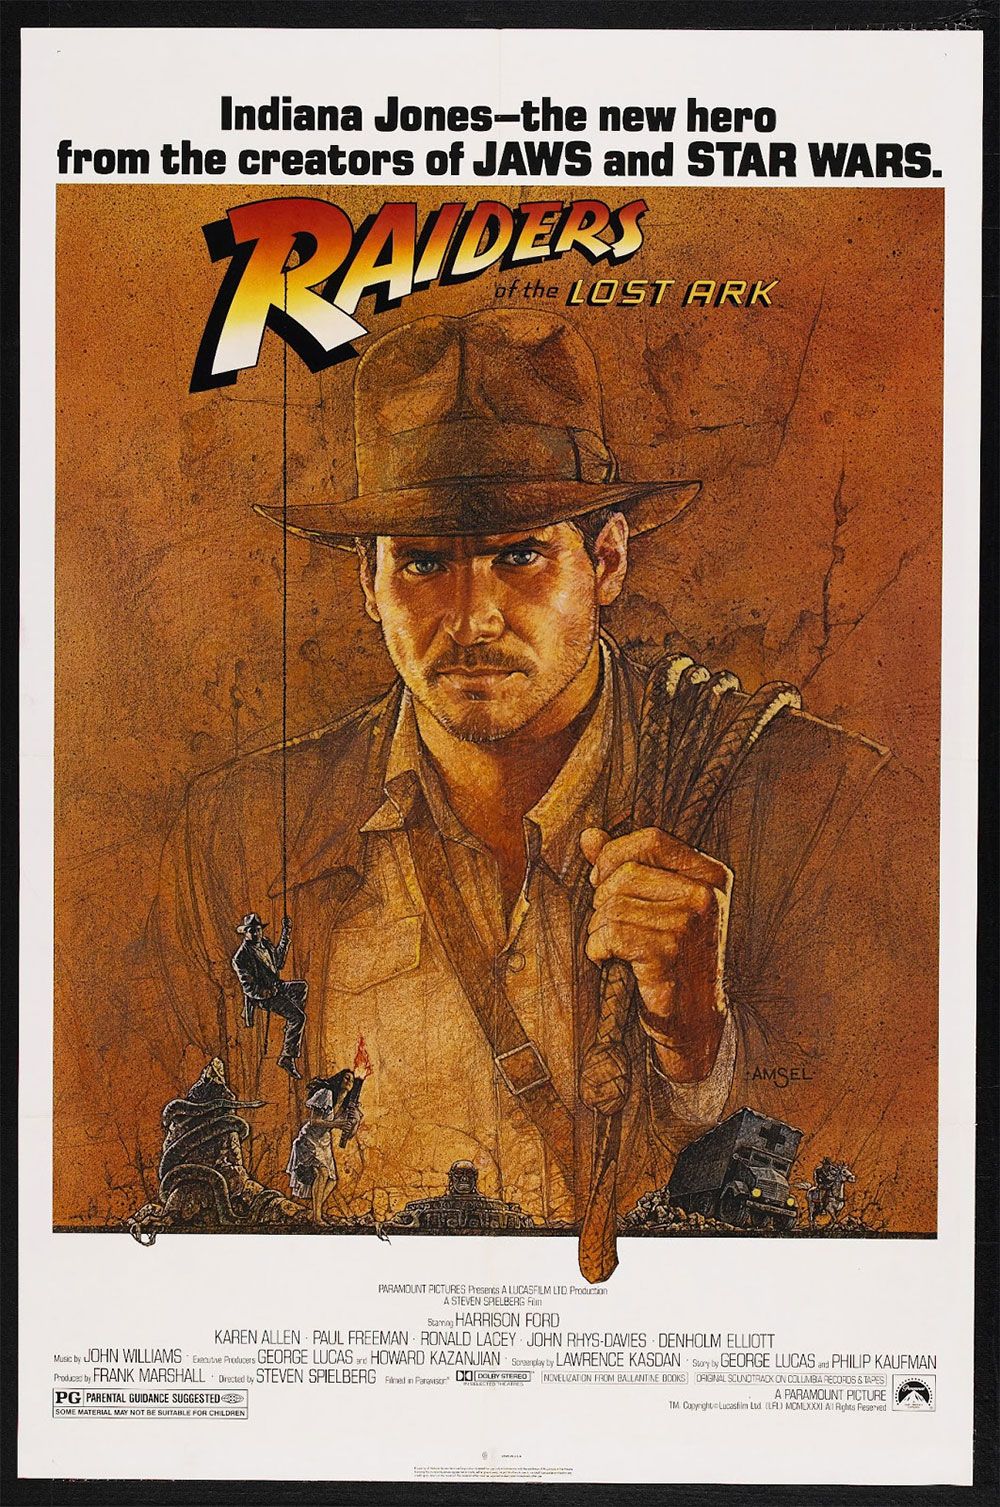 The original 1980s poster for Raiders of the Lost Ark